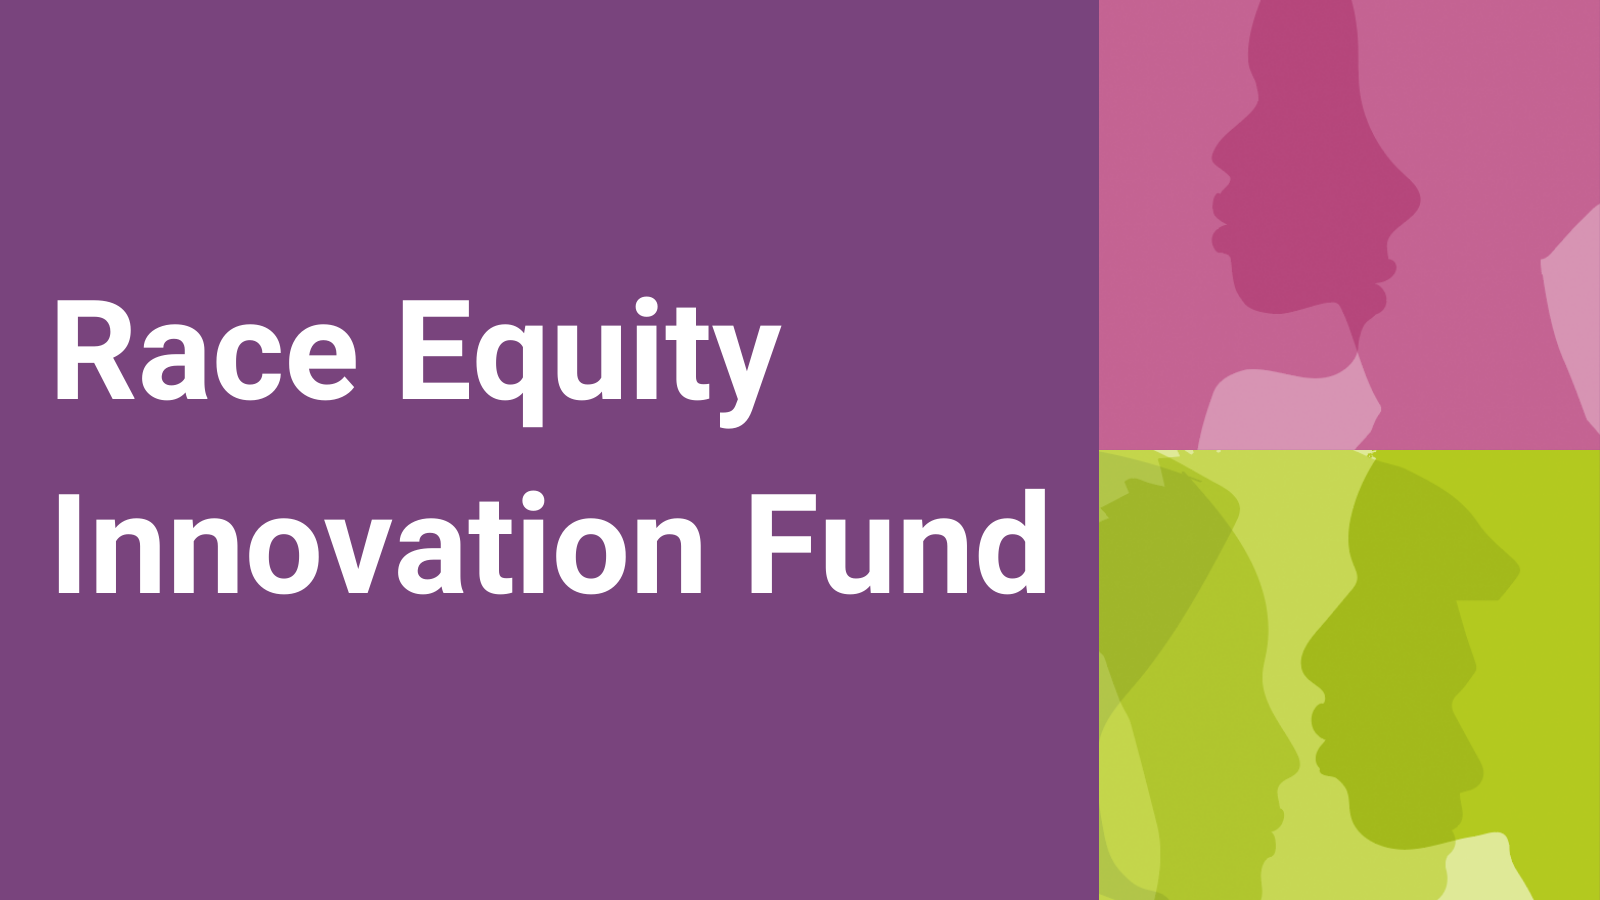 Race Equity Innovation Fund 16x9 text